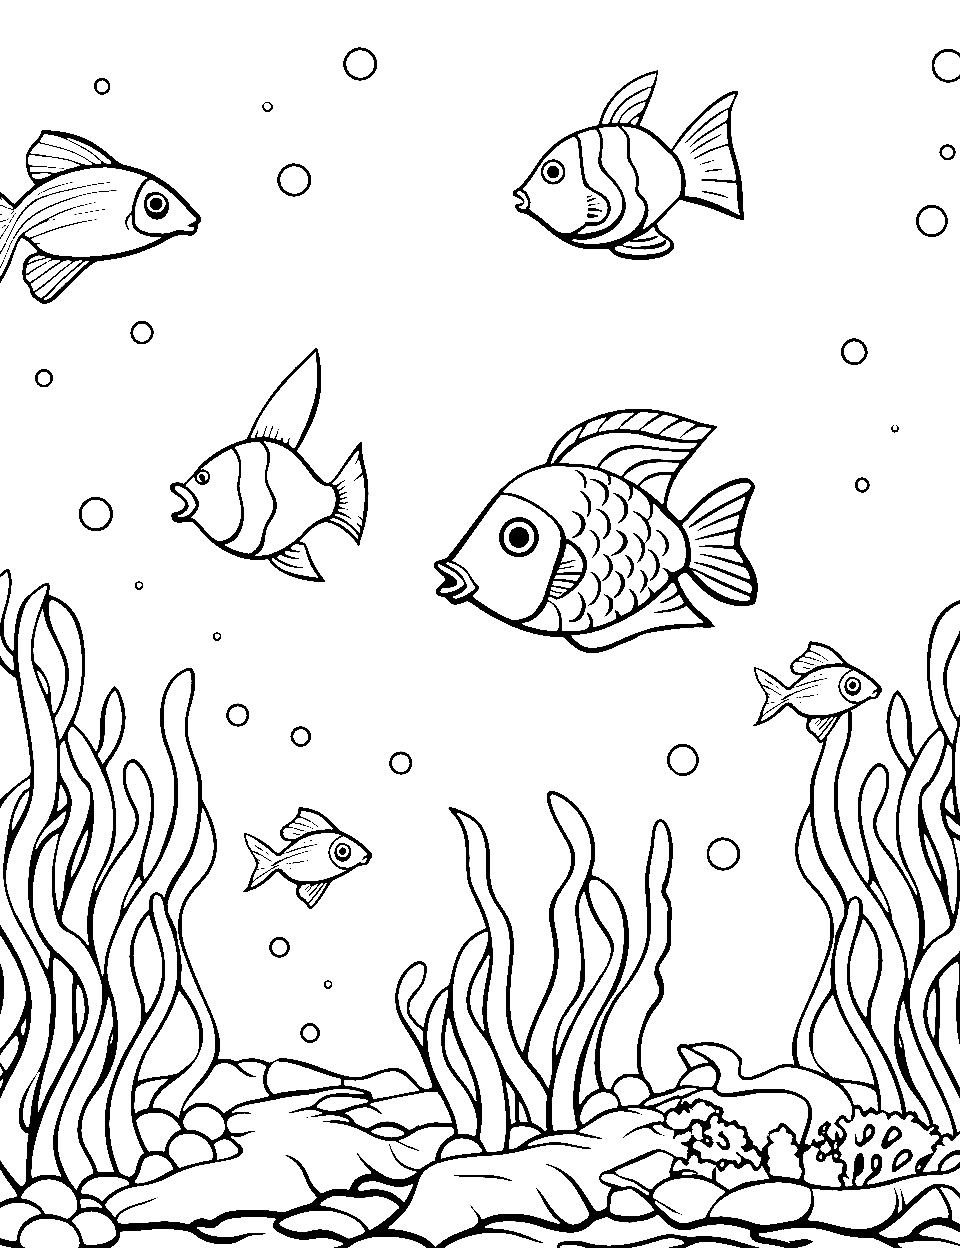 Tropical Fish Fiesta Ocean Coloring Page - Bunch of tropical fish among simple aquatic plants.